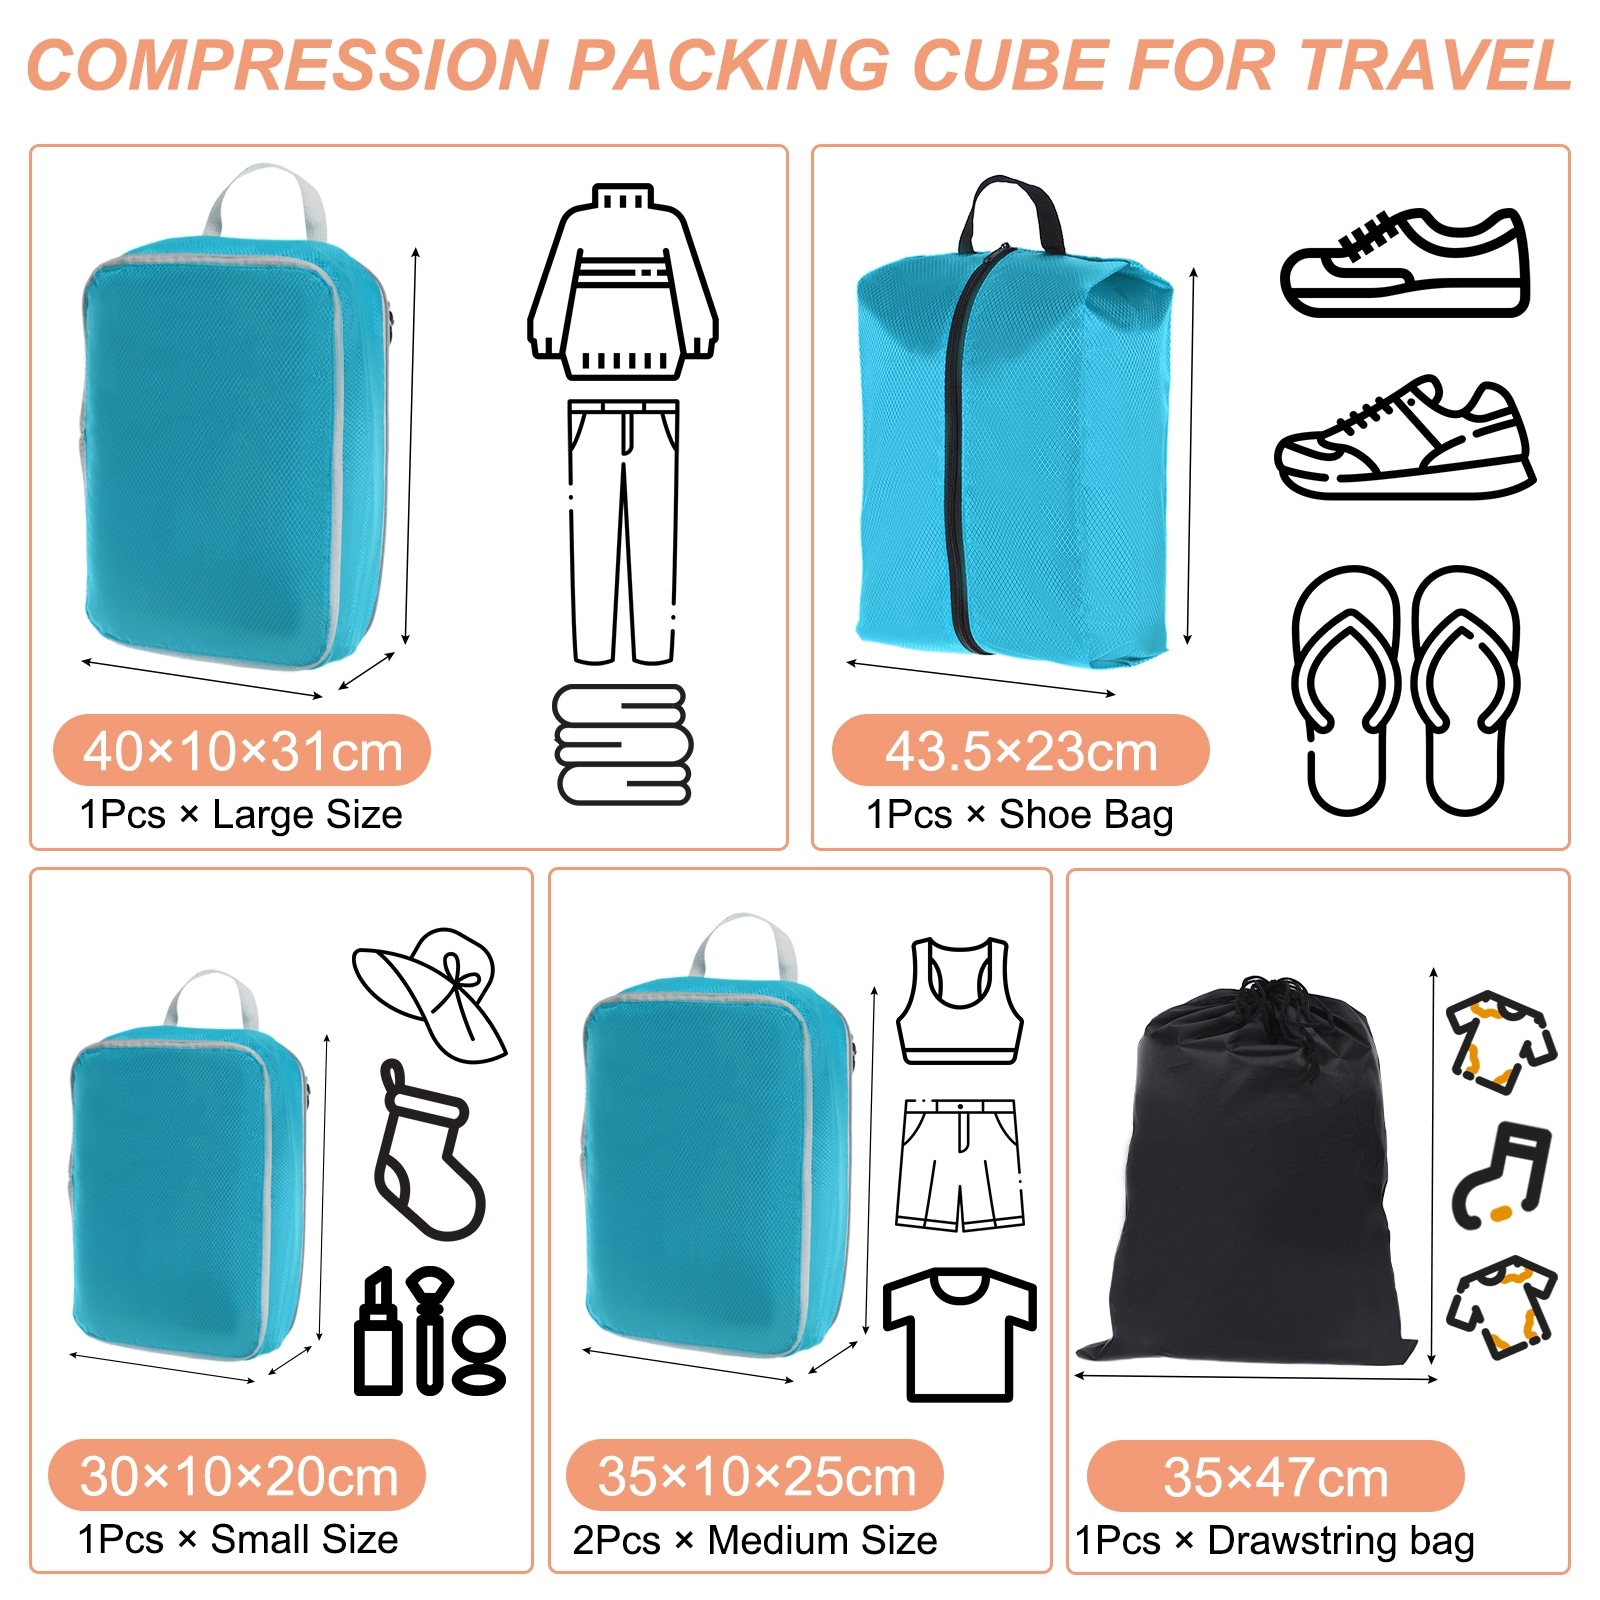 Compression Packing Cubes, Luggage Packing Organizers for Travel